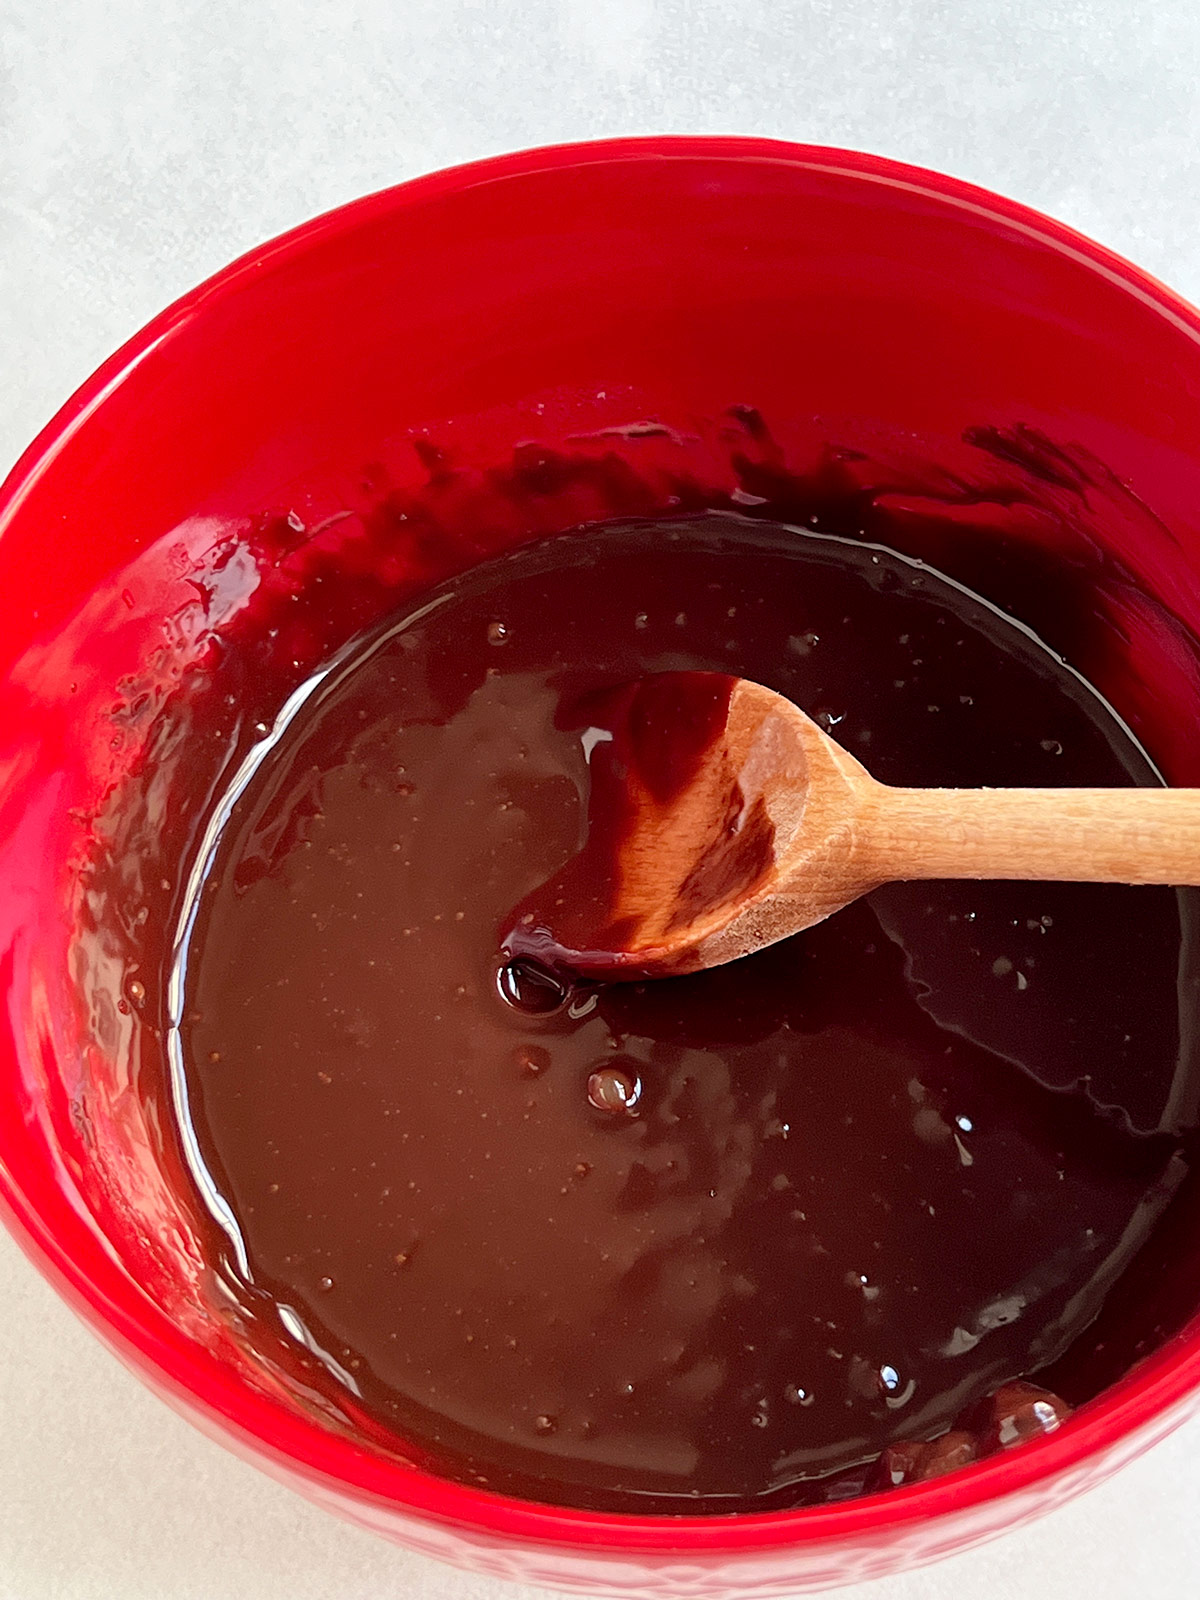 Chocolate truffle mixture with wooden spoon in red bowl.